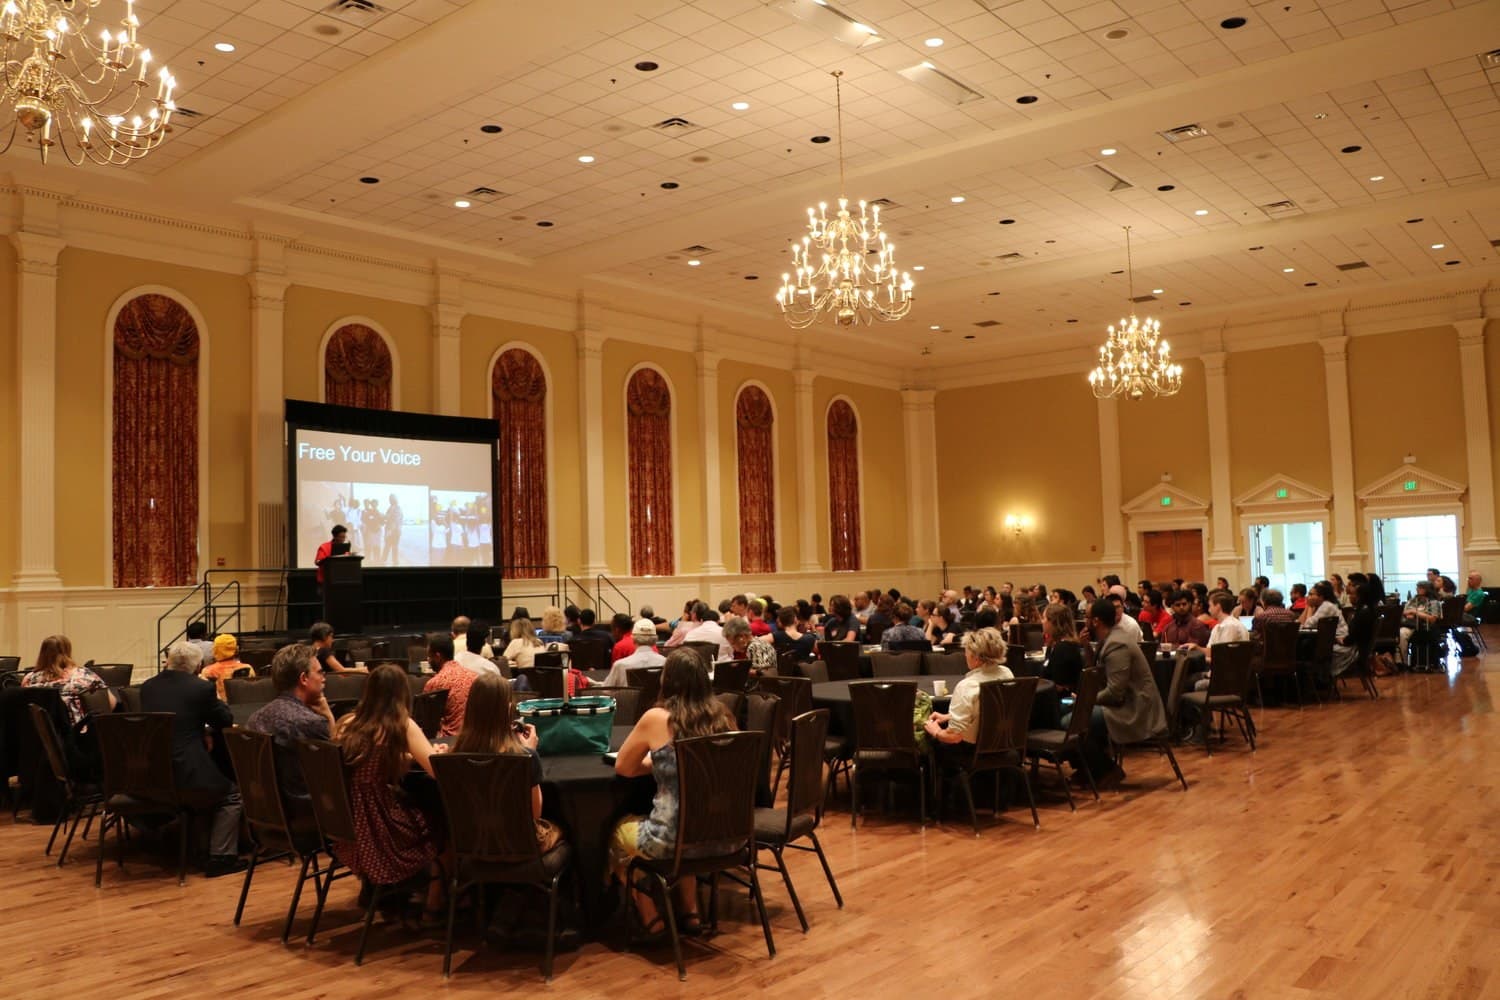 STAMP Ballroom filled with attendees for the 4TH UMD SYMPOSIUM ON ENVIRONMENTAL JUSTICE & HEALTH DISPARITIES